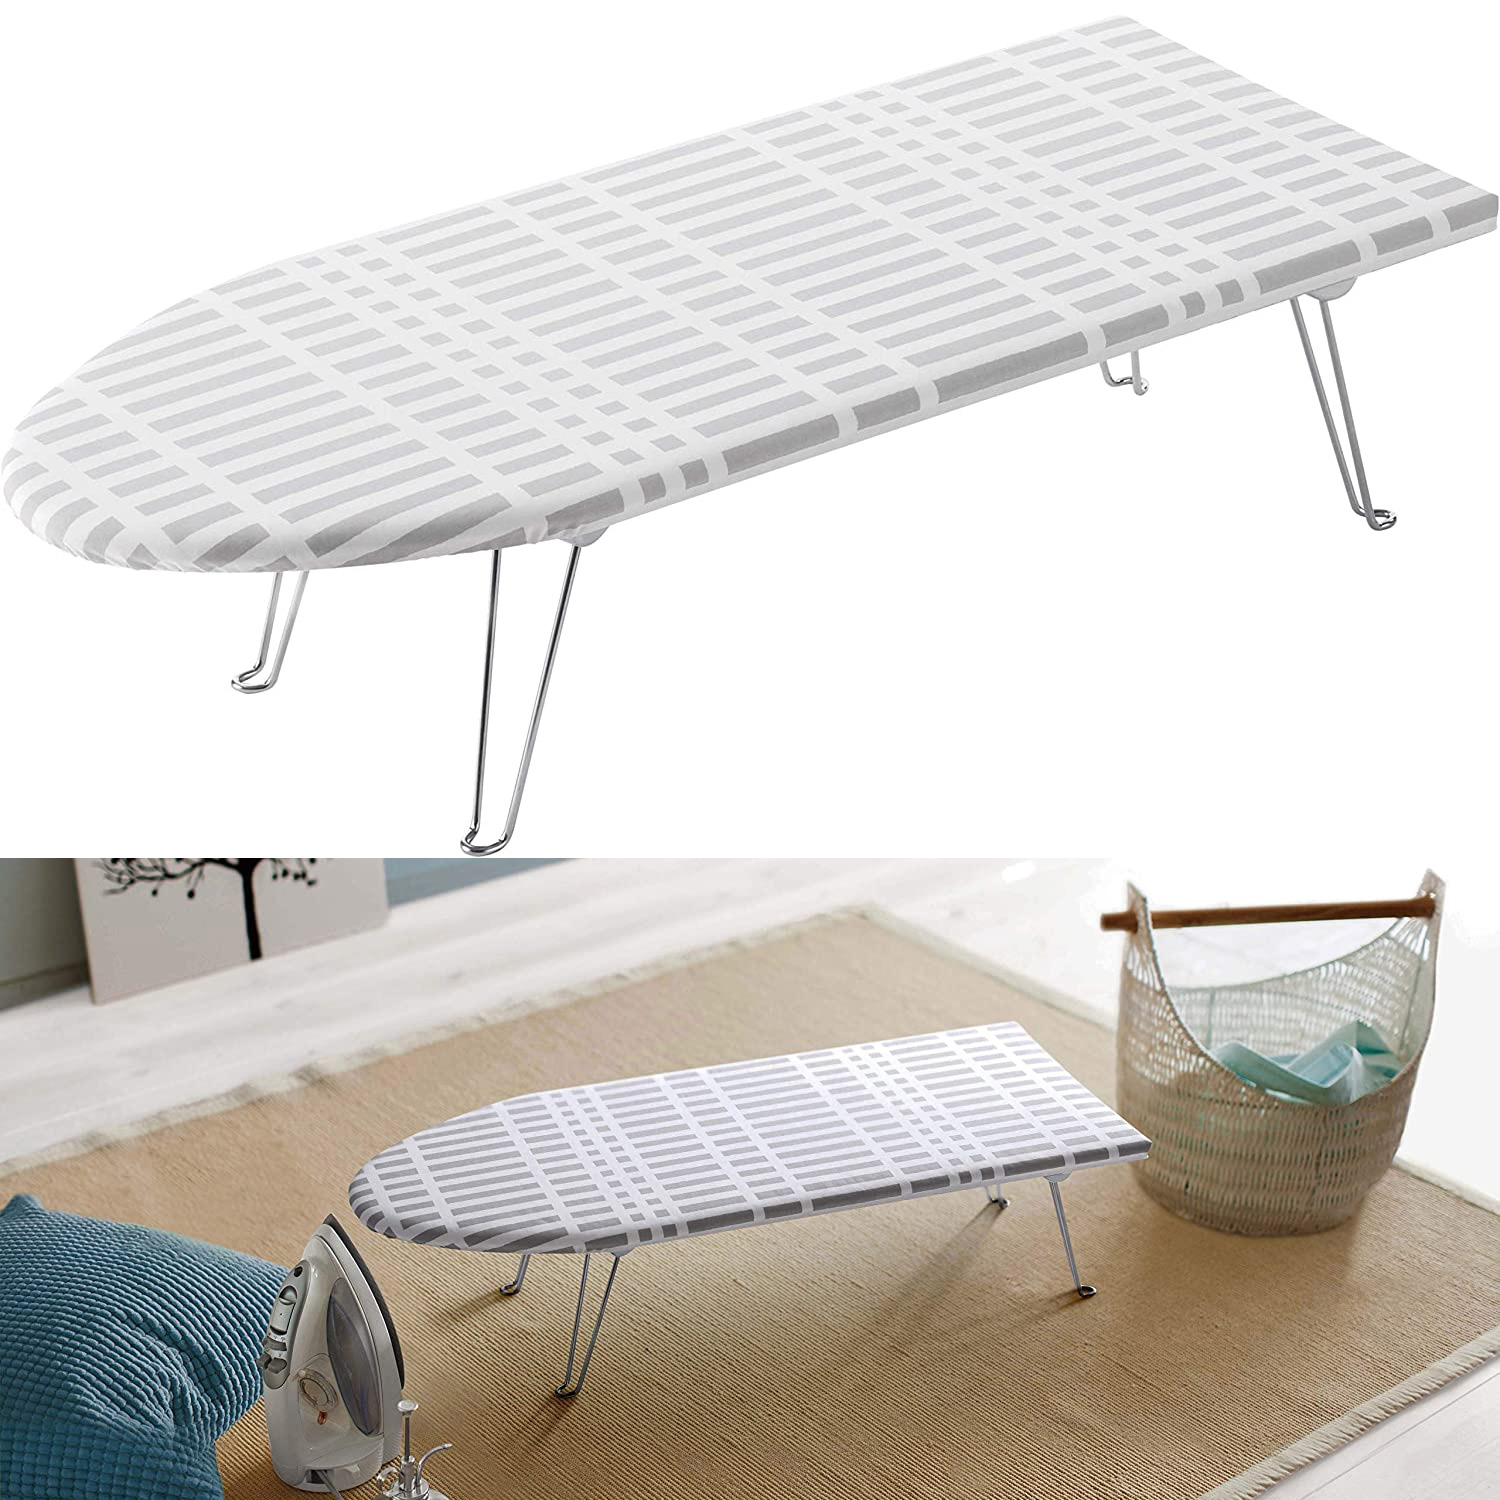 YJ1223 Ironing Board"", Pointy End"", with foots (pcs)